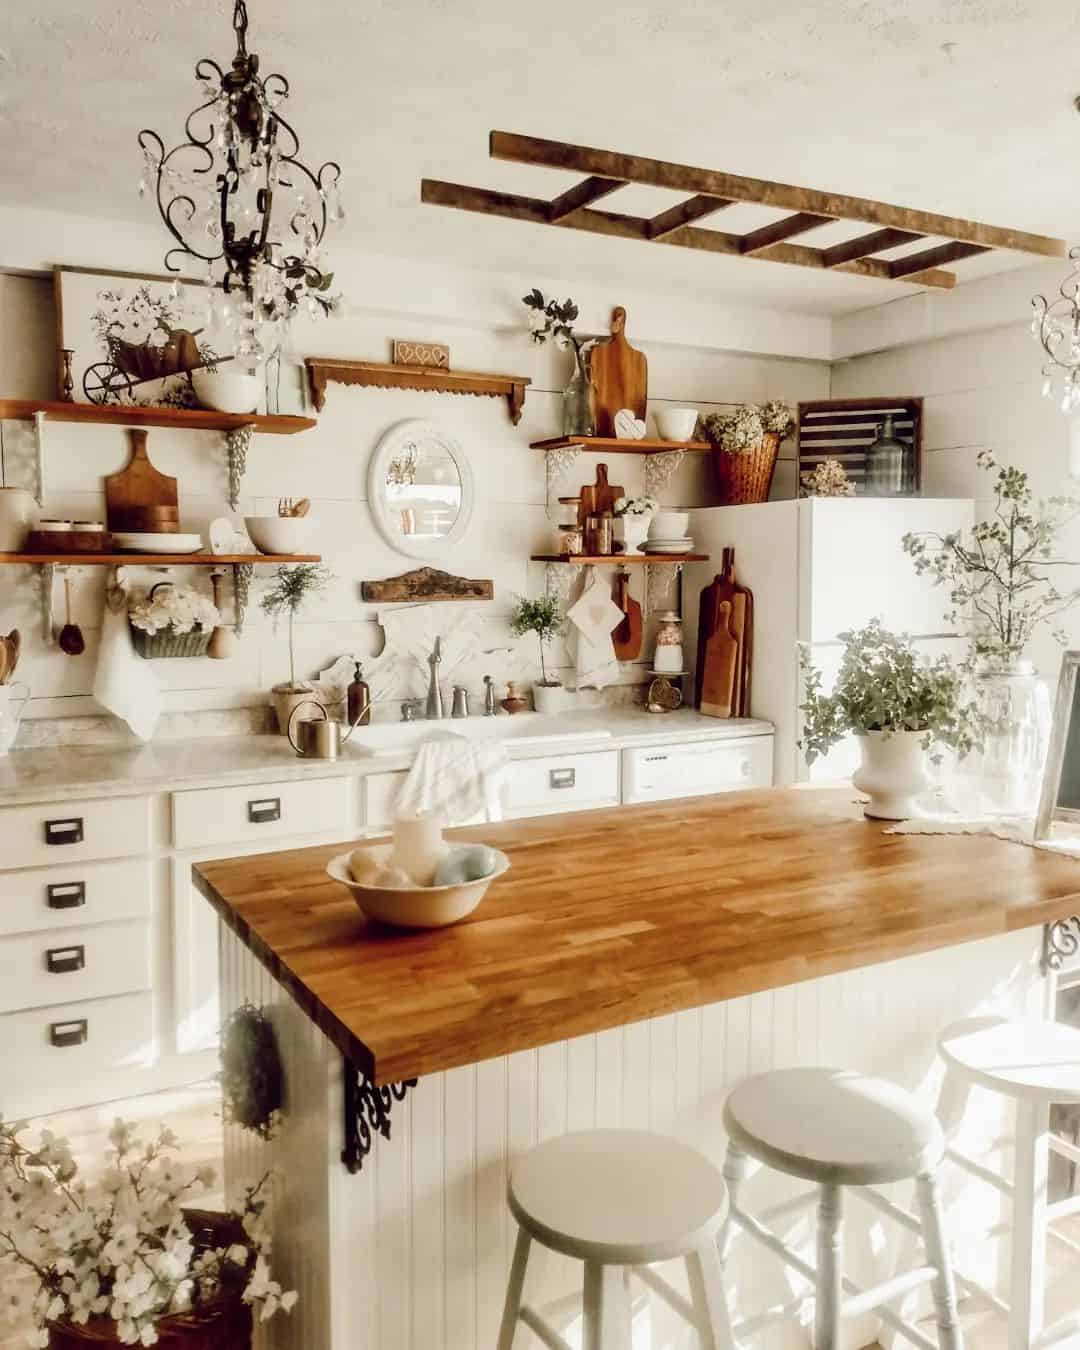 Embracing Simplicity with White & Wood